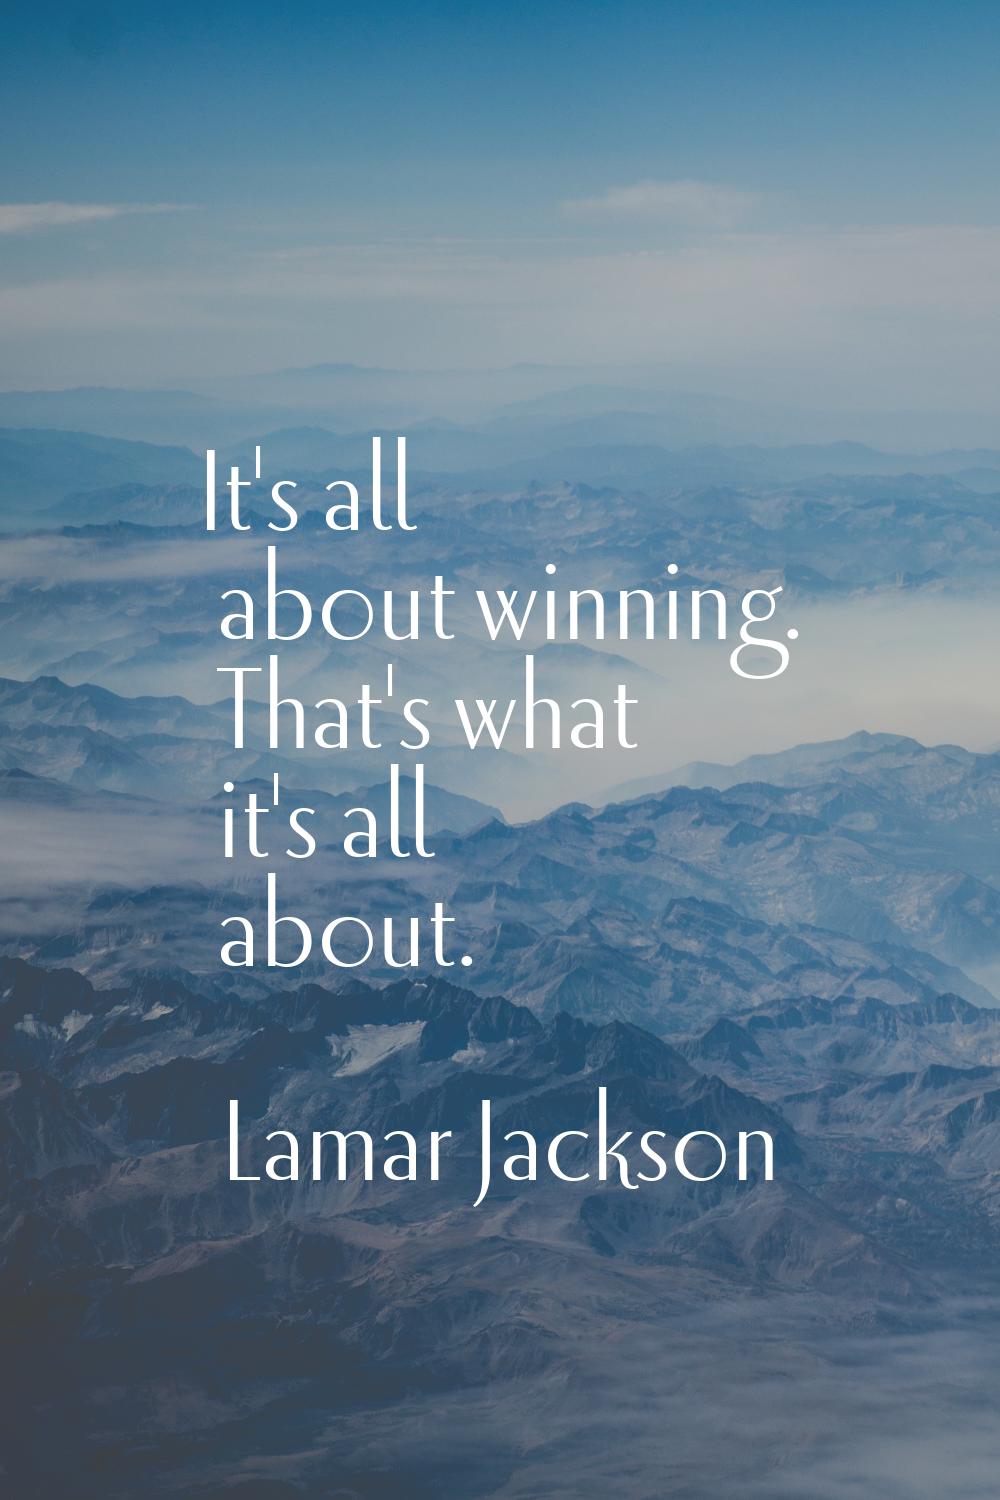 It's all about winning. That's what it's all about.